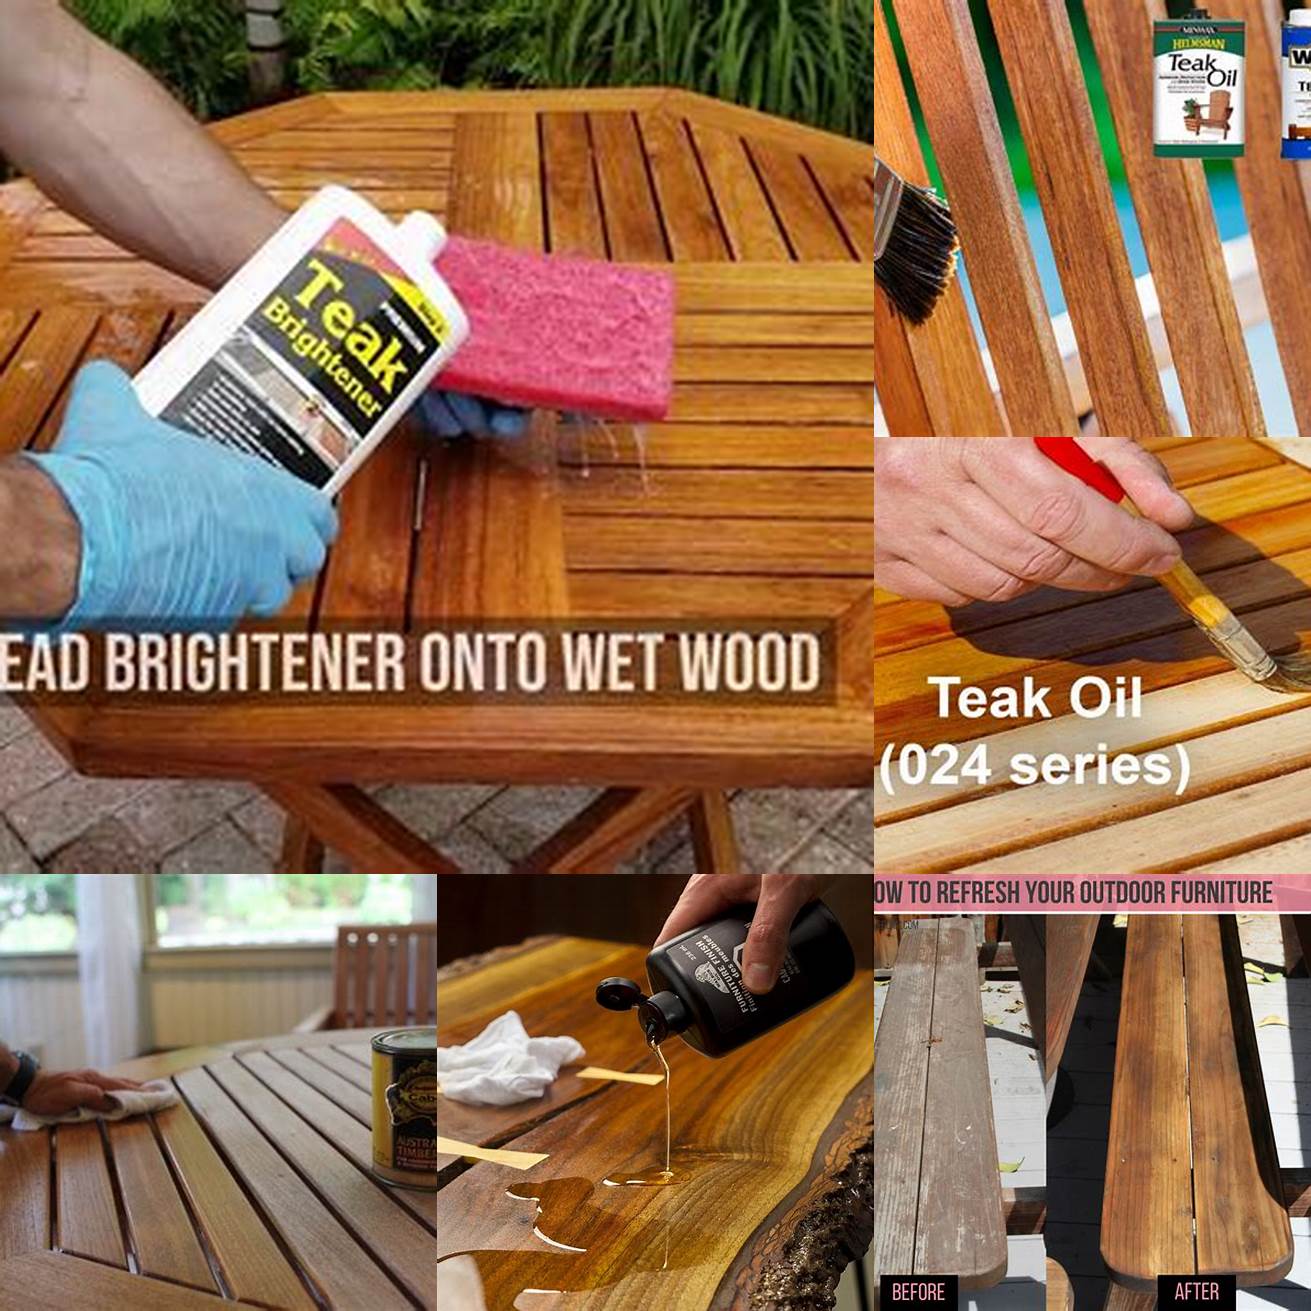 Apply a thin layer of teak oil